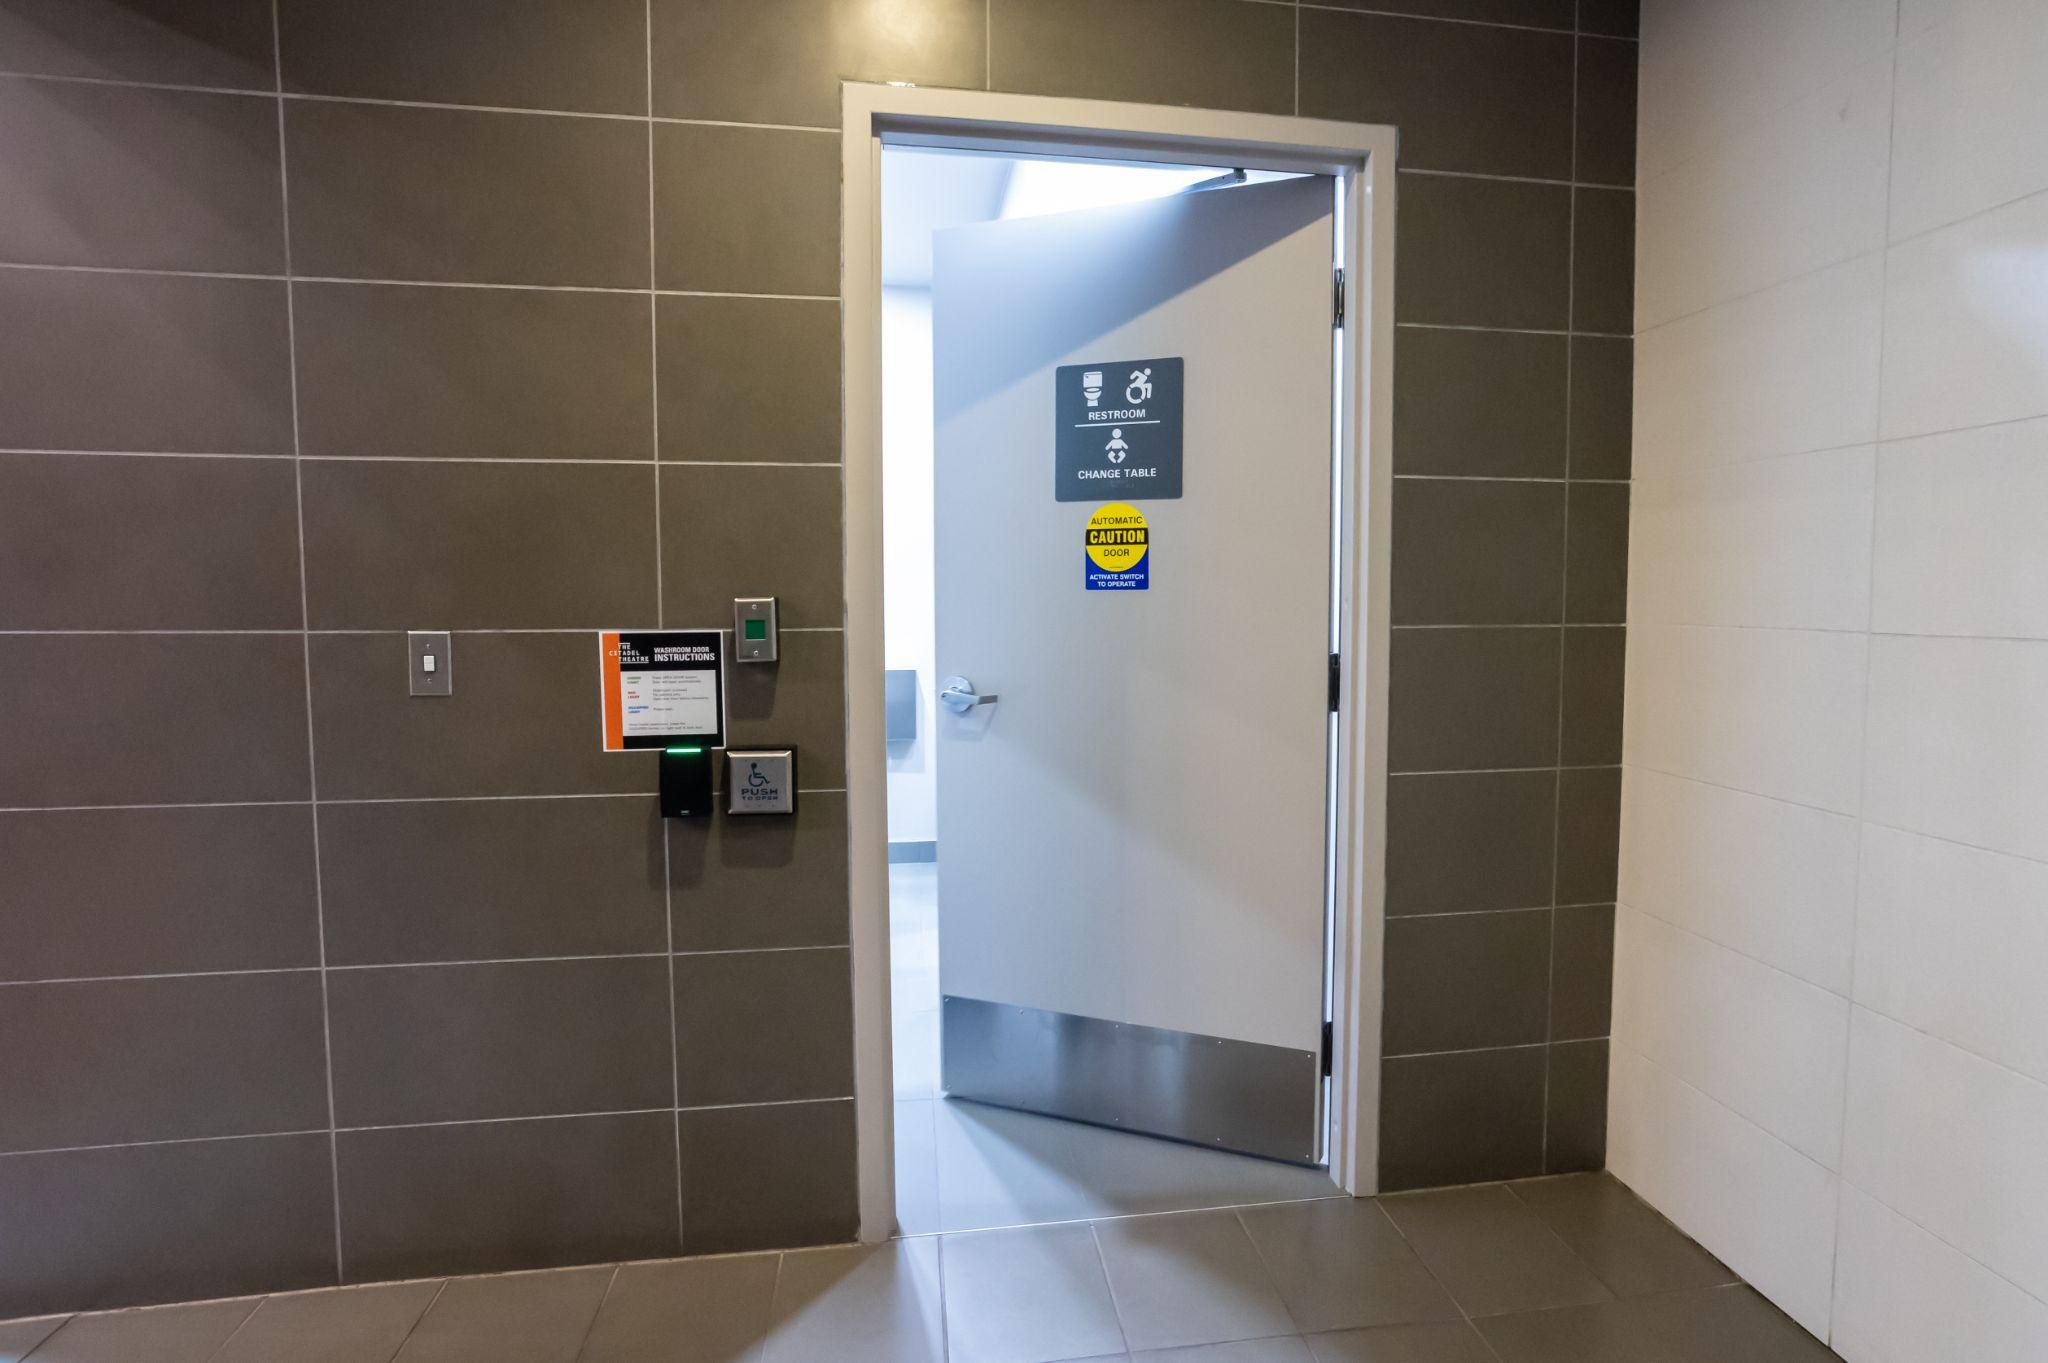 View as door opens into accessible washroom on main floor. There is a wave switch by the door.